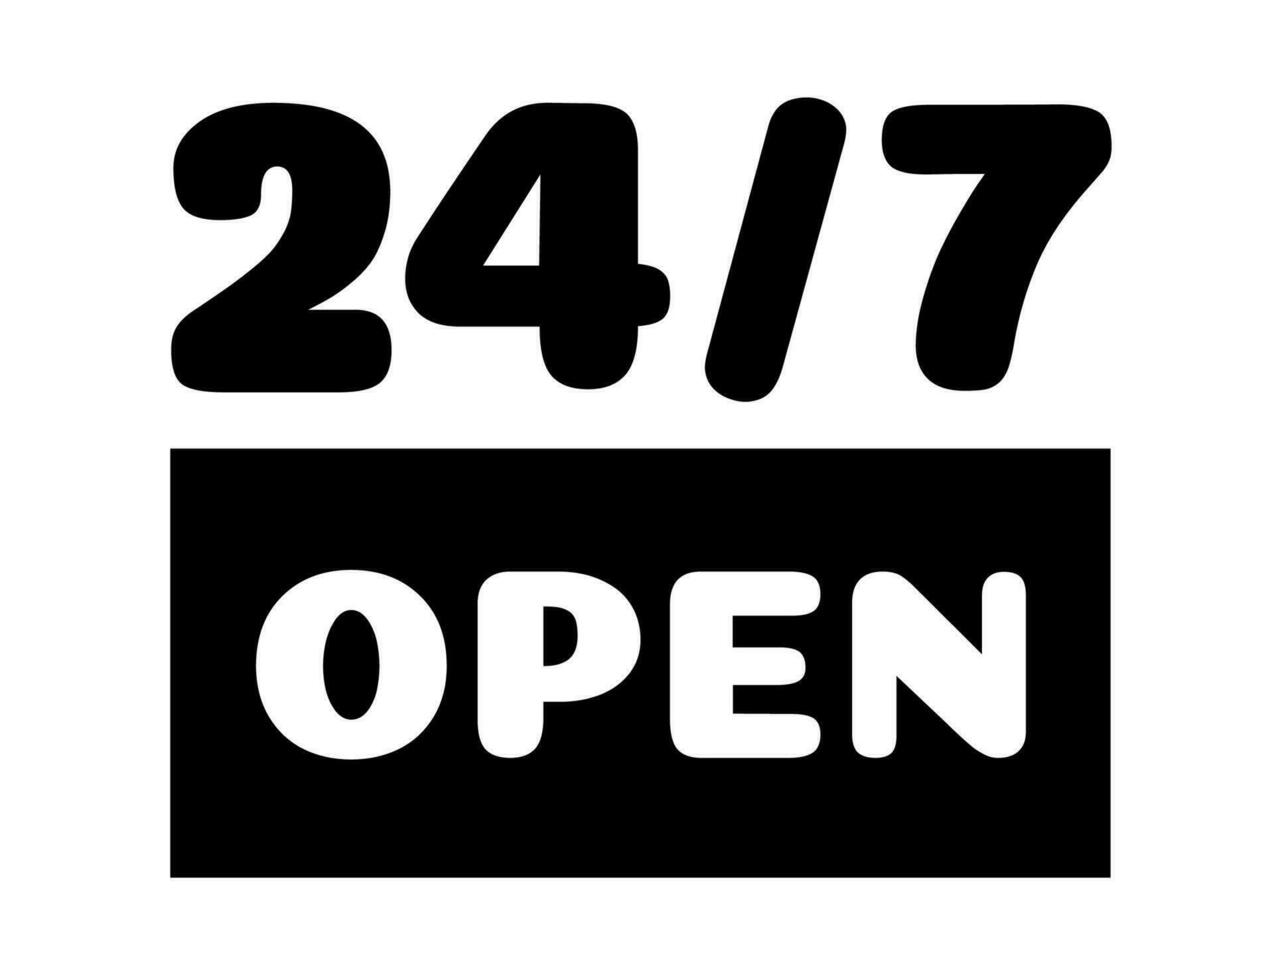 24 hours open sign black color style vector